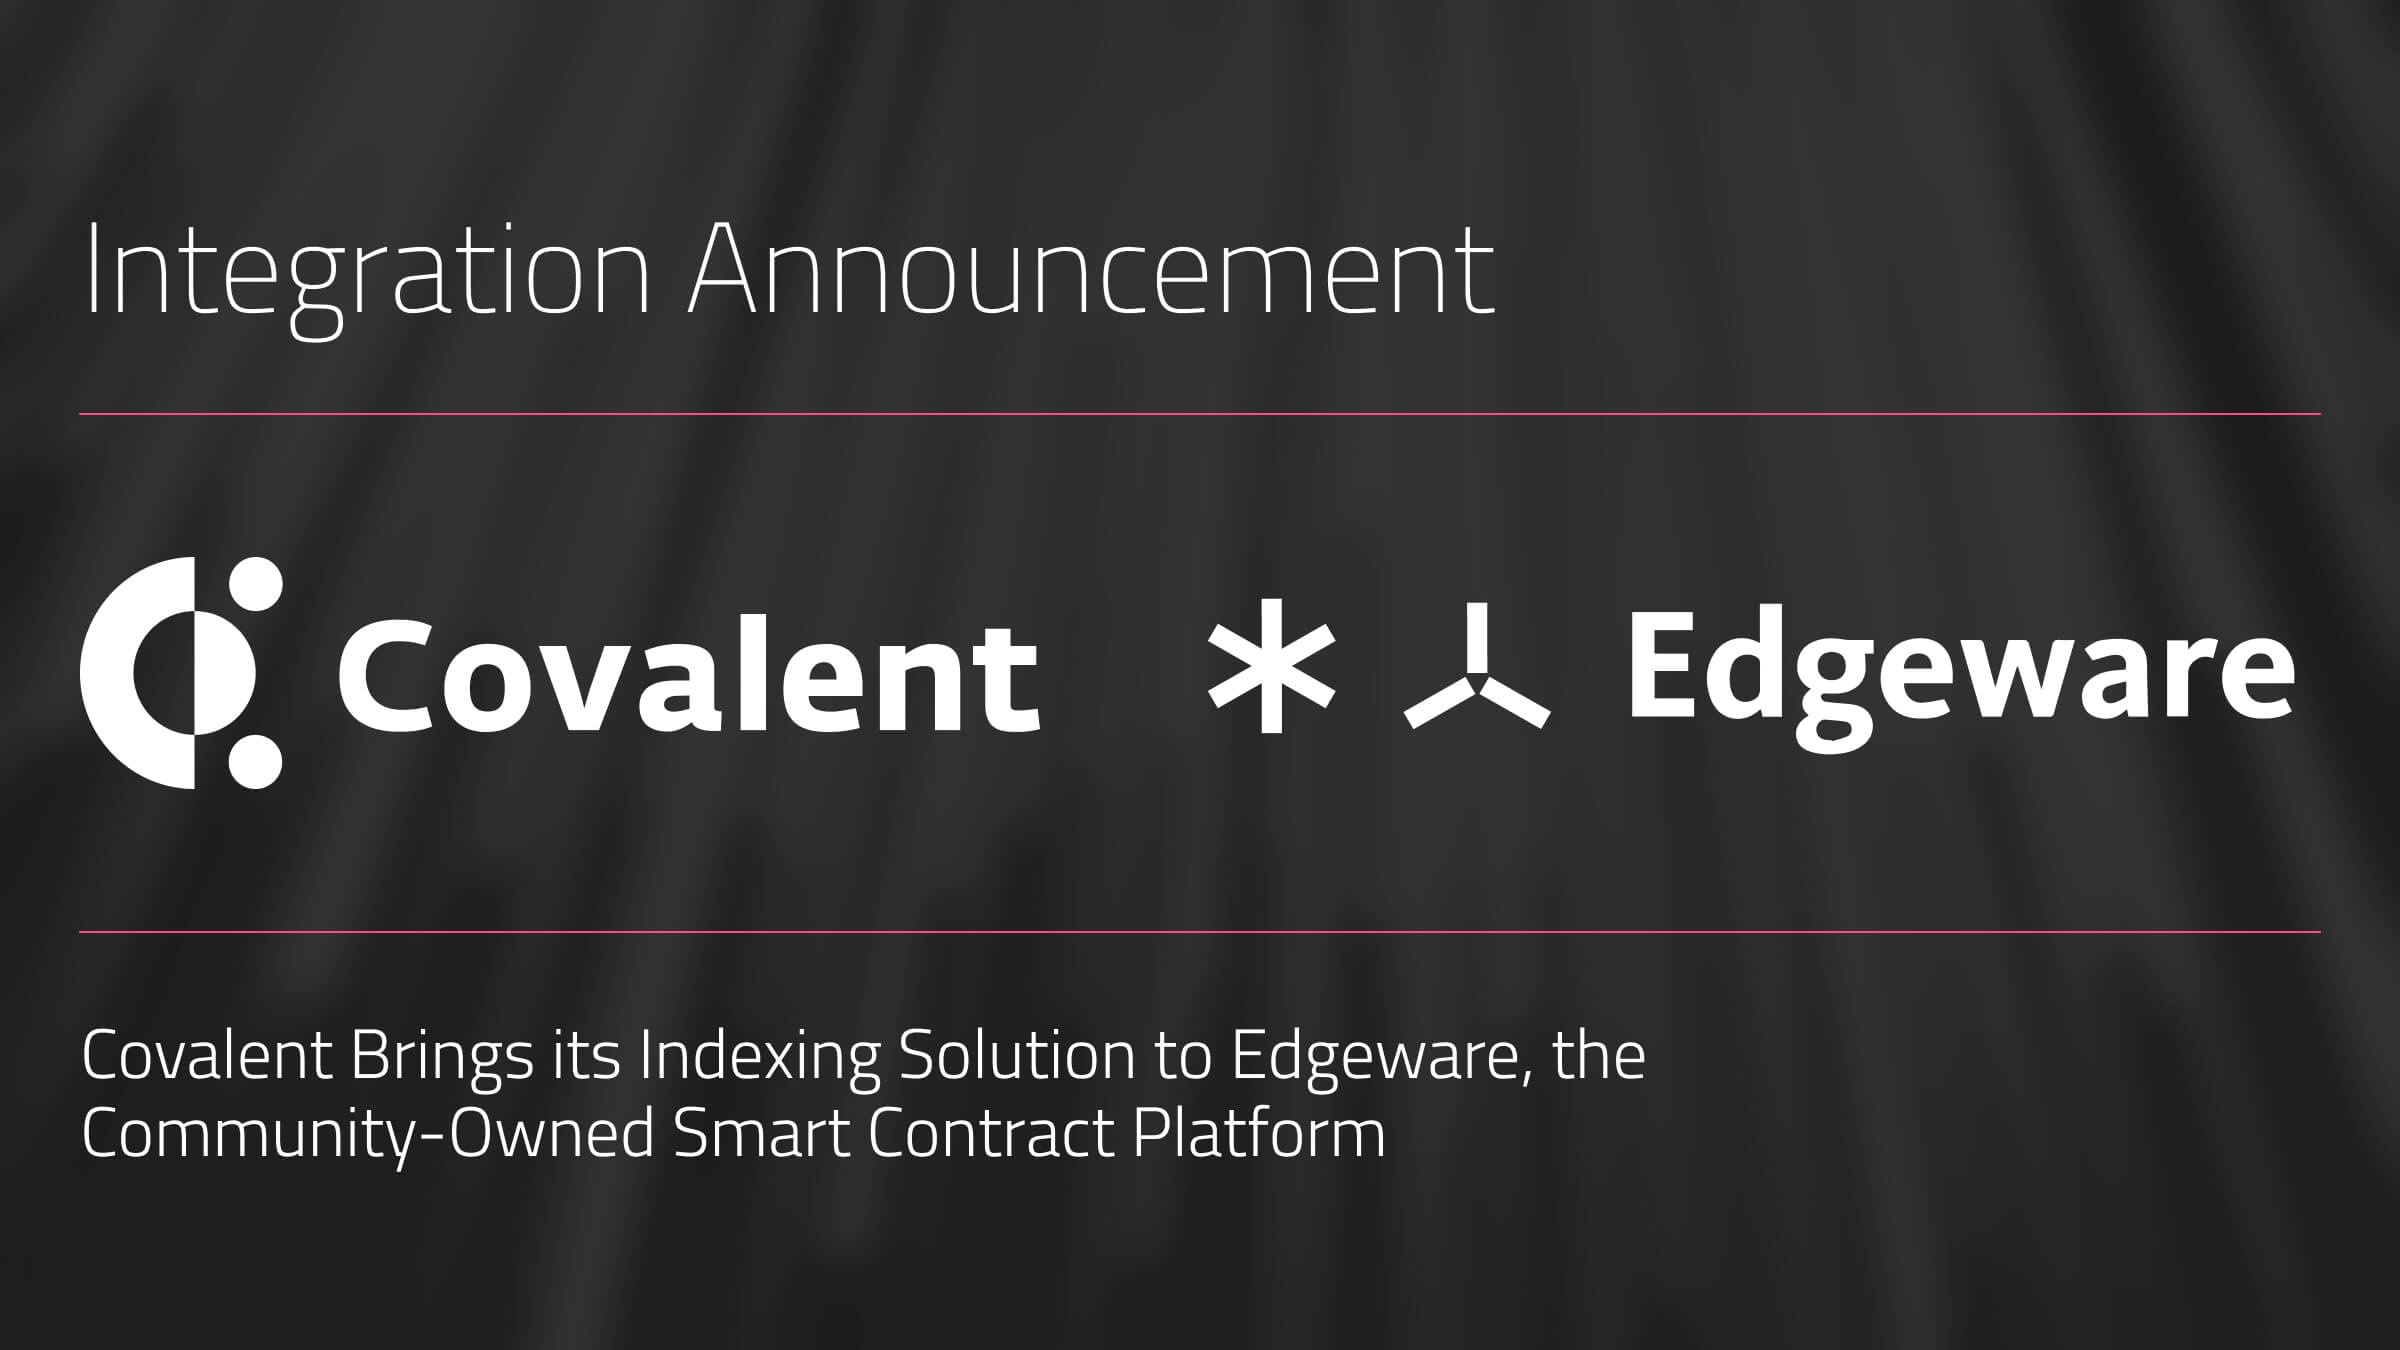 Covalent Brings its Indexing Solution to Edgeware